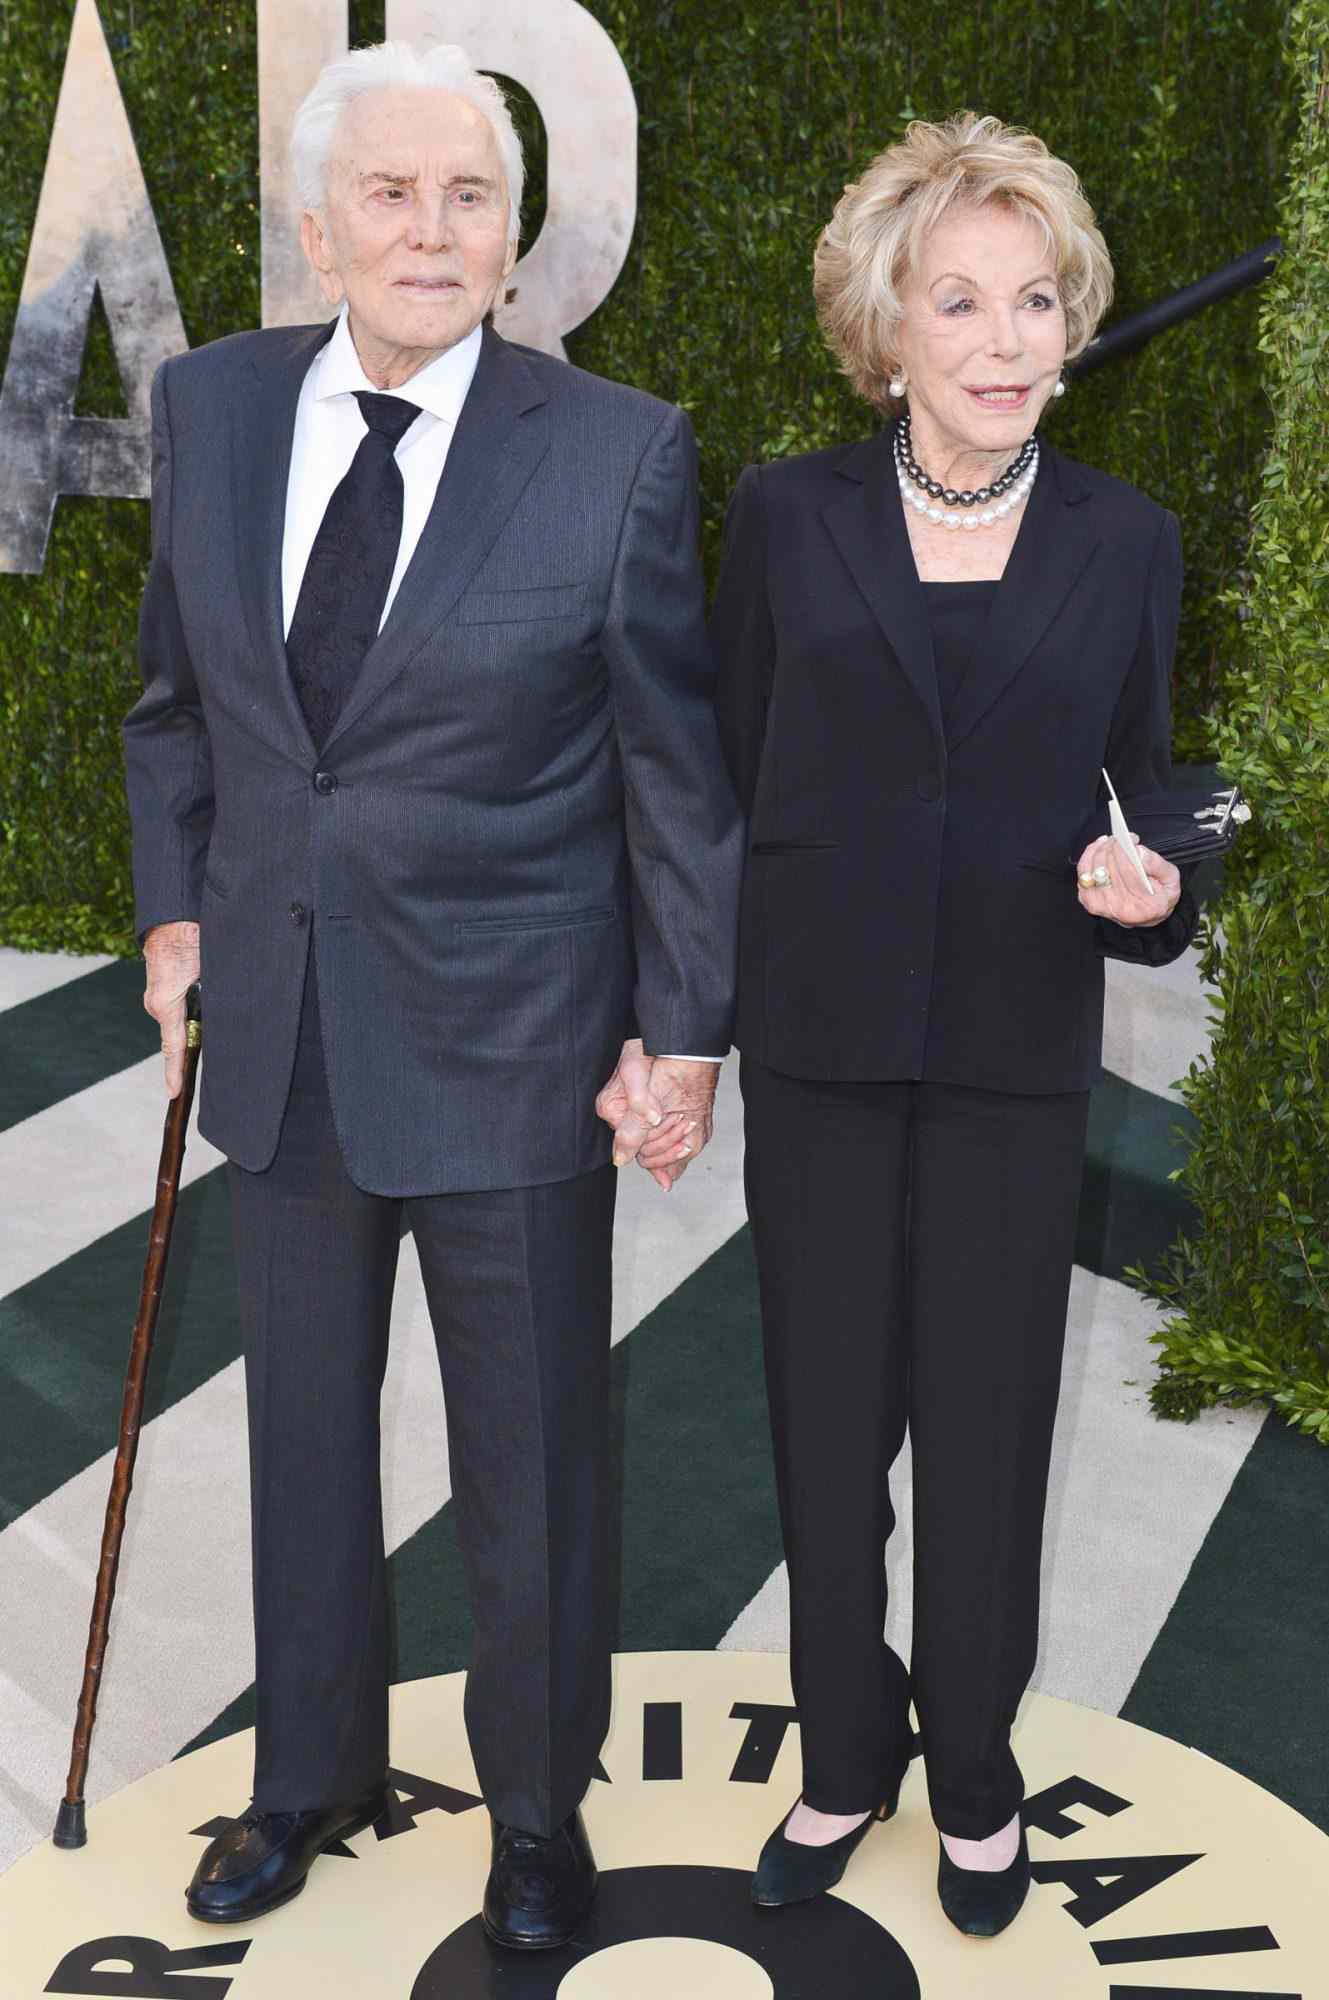 Kirk Douglas and wife Anne arrive at the 2013 Vanity Fair Oscar Party on Feb. 24, 2013